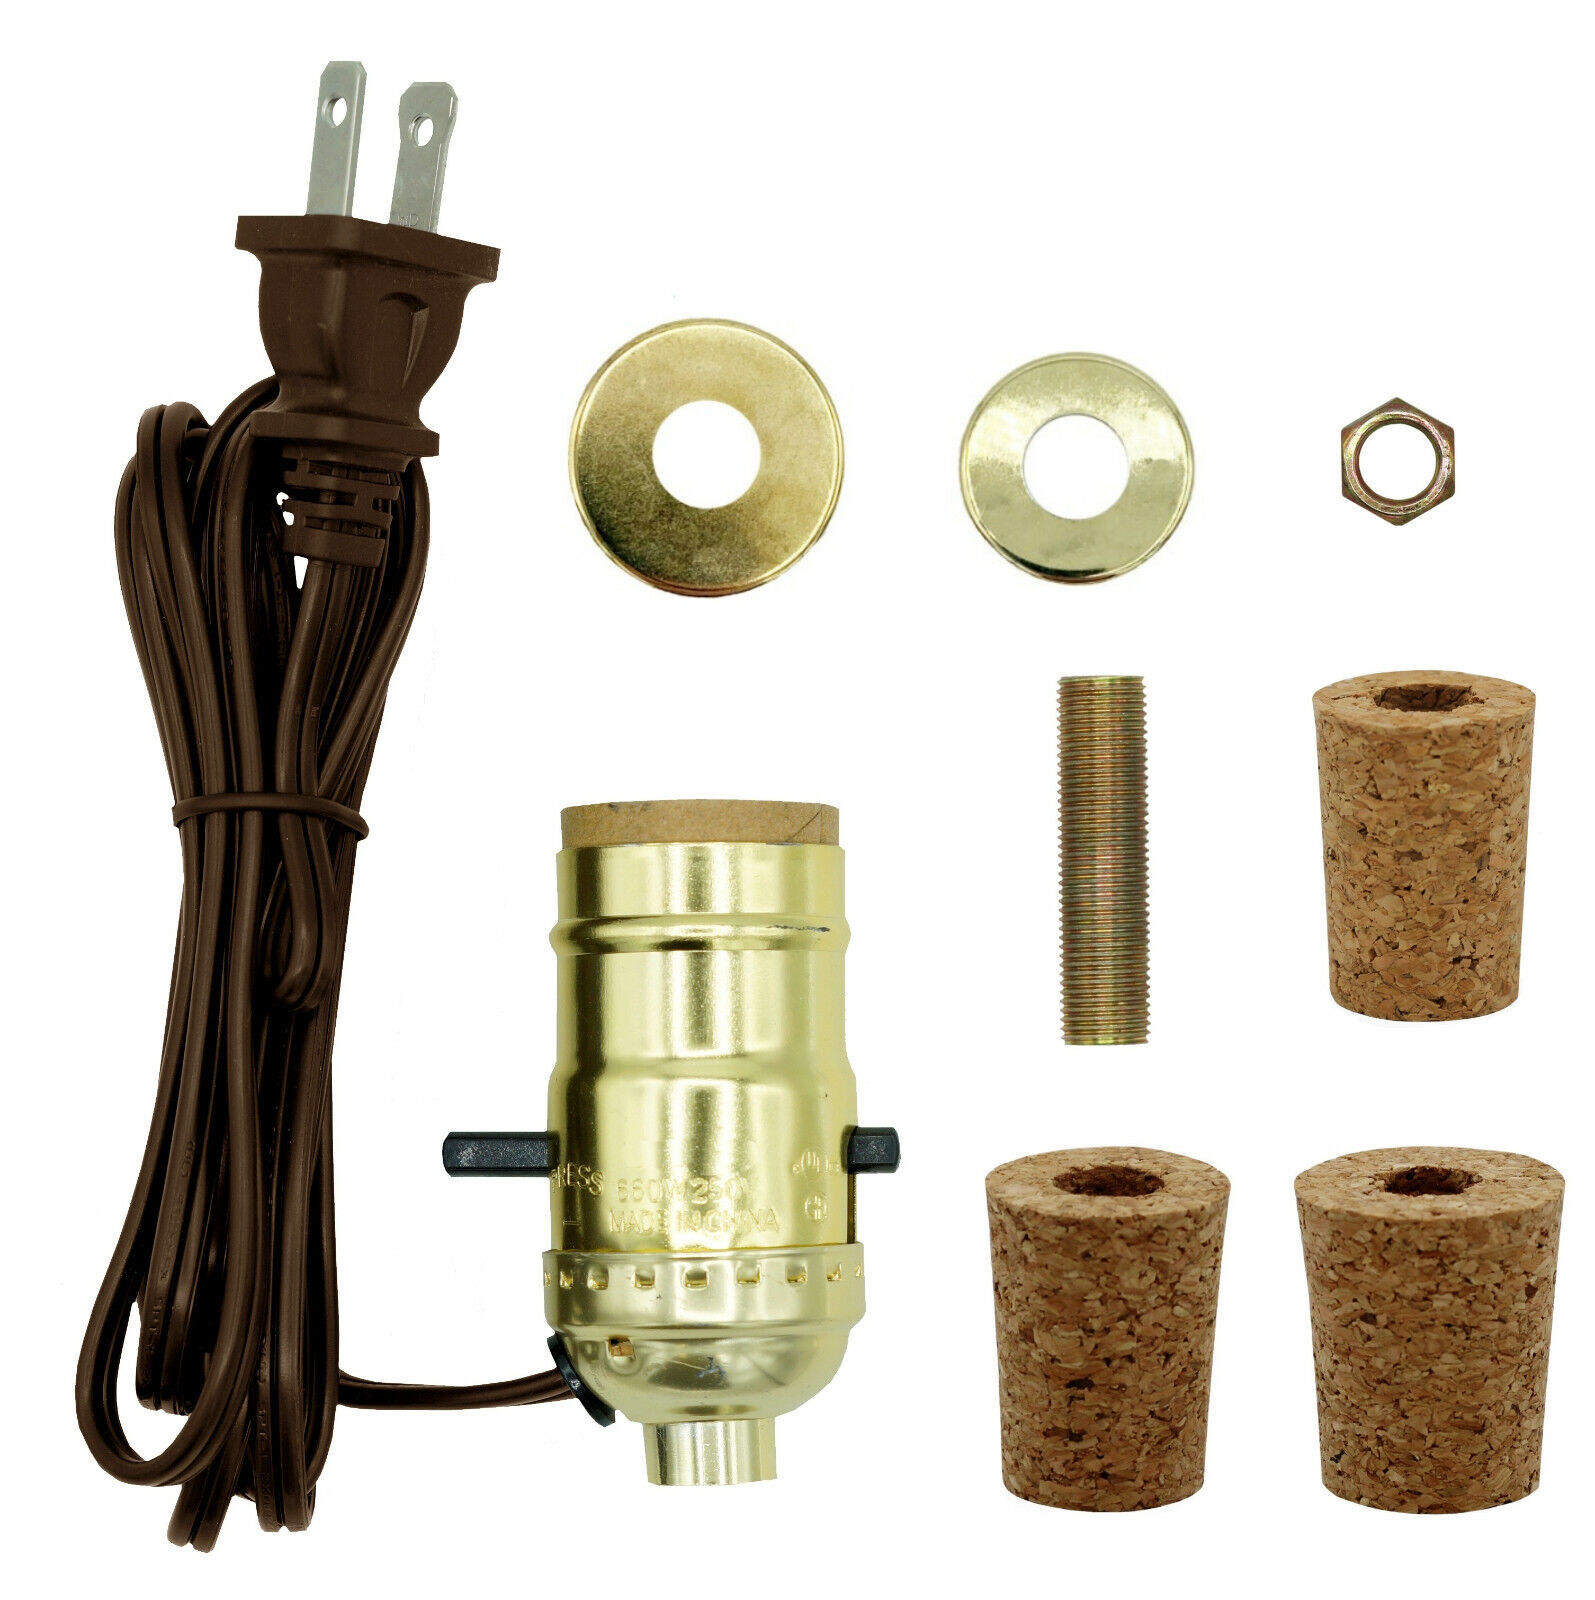 Pre-Wired Bottle Lamp Kit, Easily Convert Any Bottle Into A Lamp, DIY (Brown)